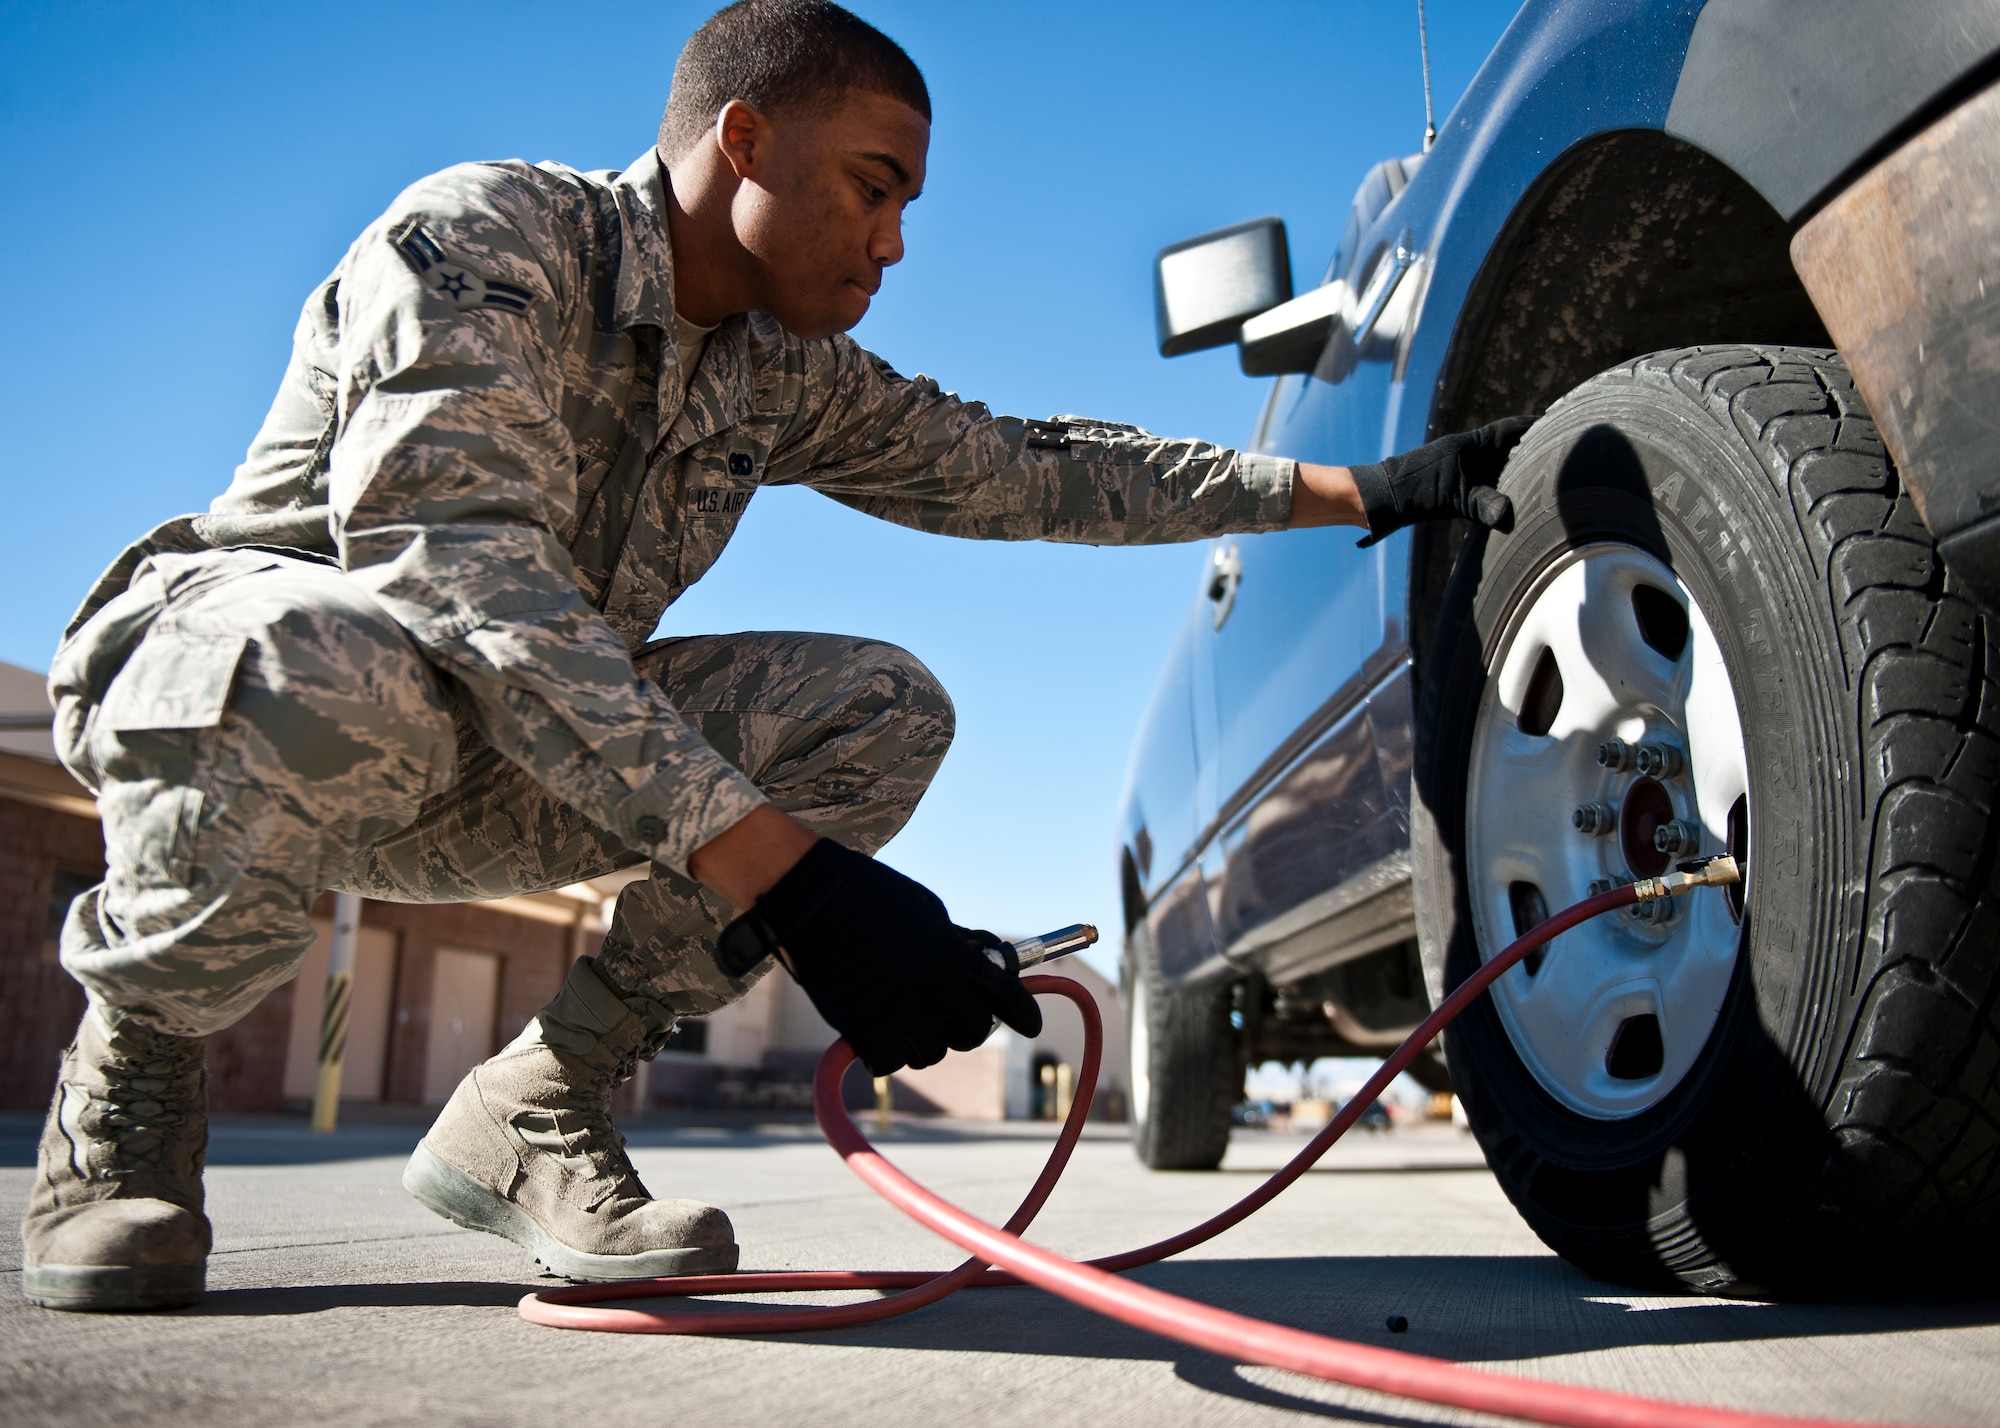 Airman 1st Class Marcus Johnson, 99th Logistics Readiness Squadron vehicle operator, services a flat tire with air at the vehicle operations center on Nellis Air Force Base, Nev., Jan. 6, 2015. Vehicle operators like Johnson help maintain the base’s vehicle fleet. (U.S. Air Force photo by Airman 1st Class Mikaley Towle)